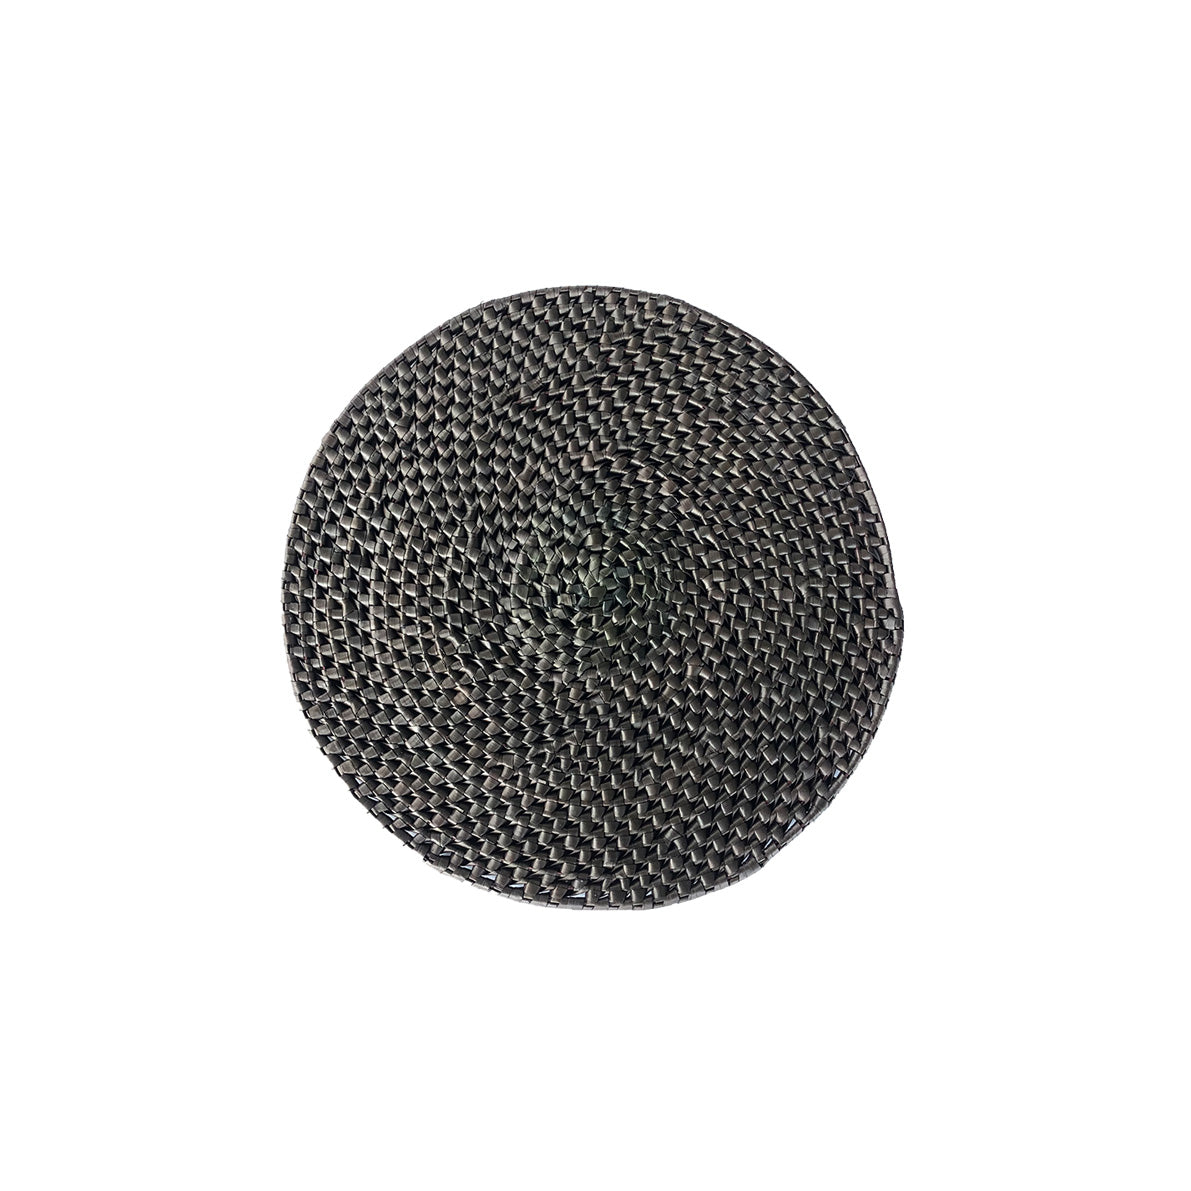 Handcrafted Palmyrah Round Placemat - Black